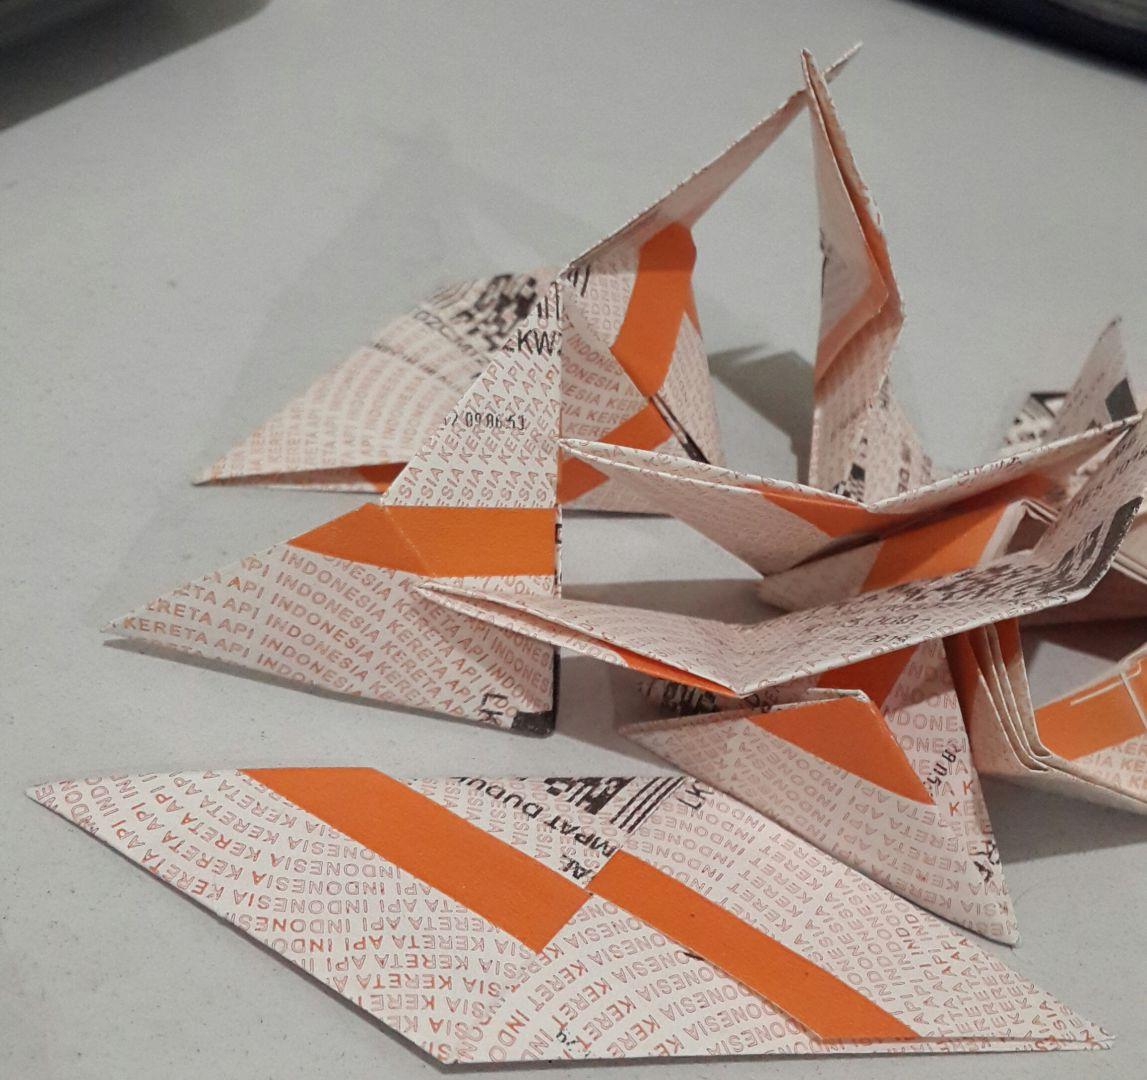 A bunch of few sonobe origami units, each folded from an orange and white train ticket stub.